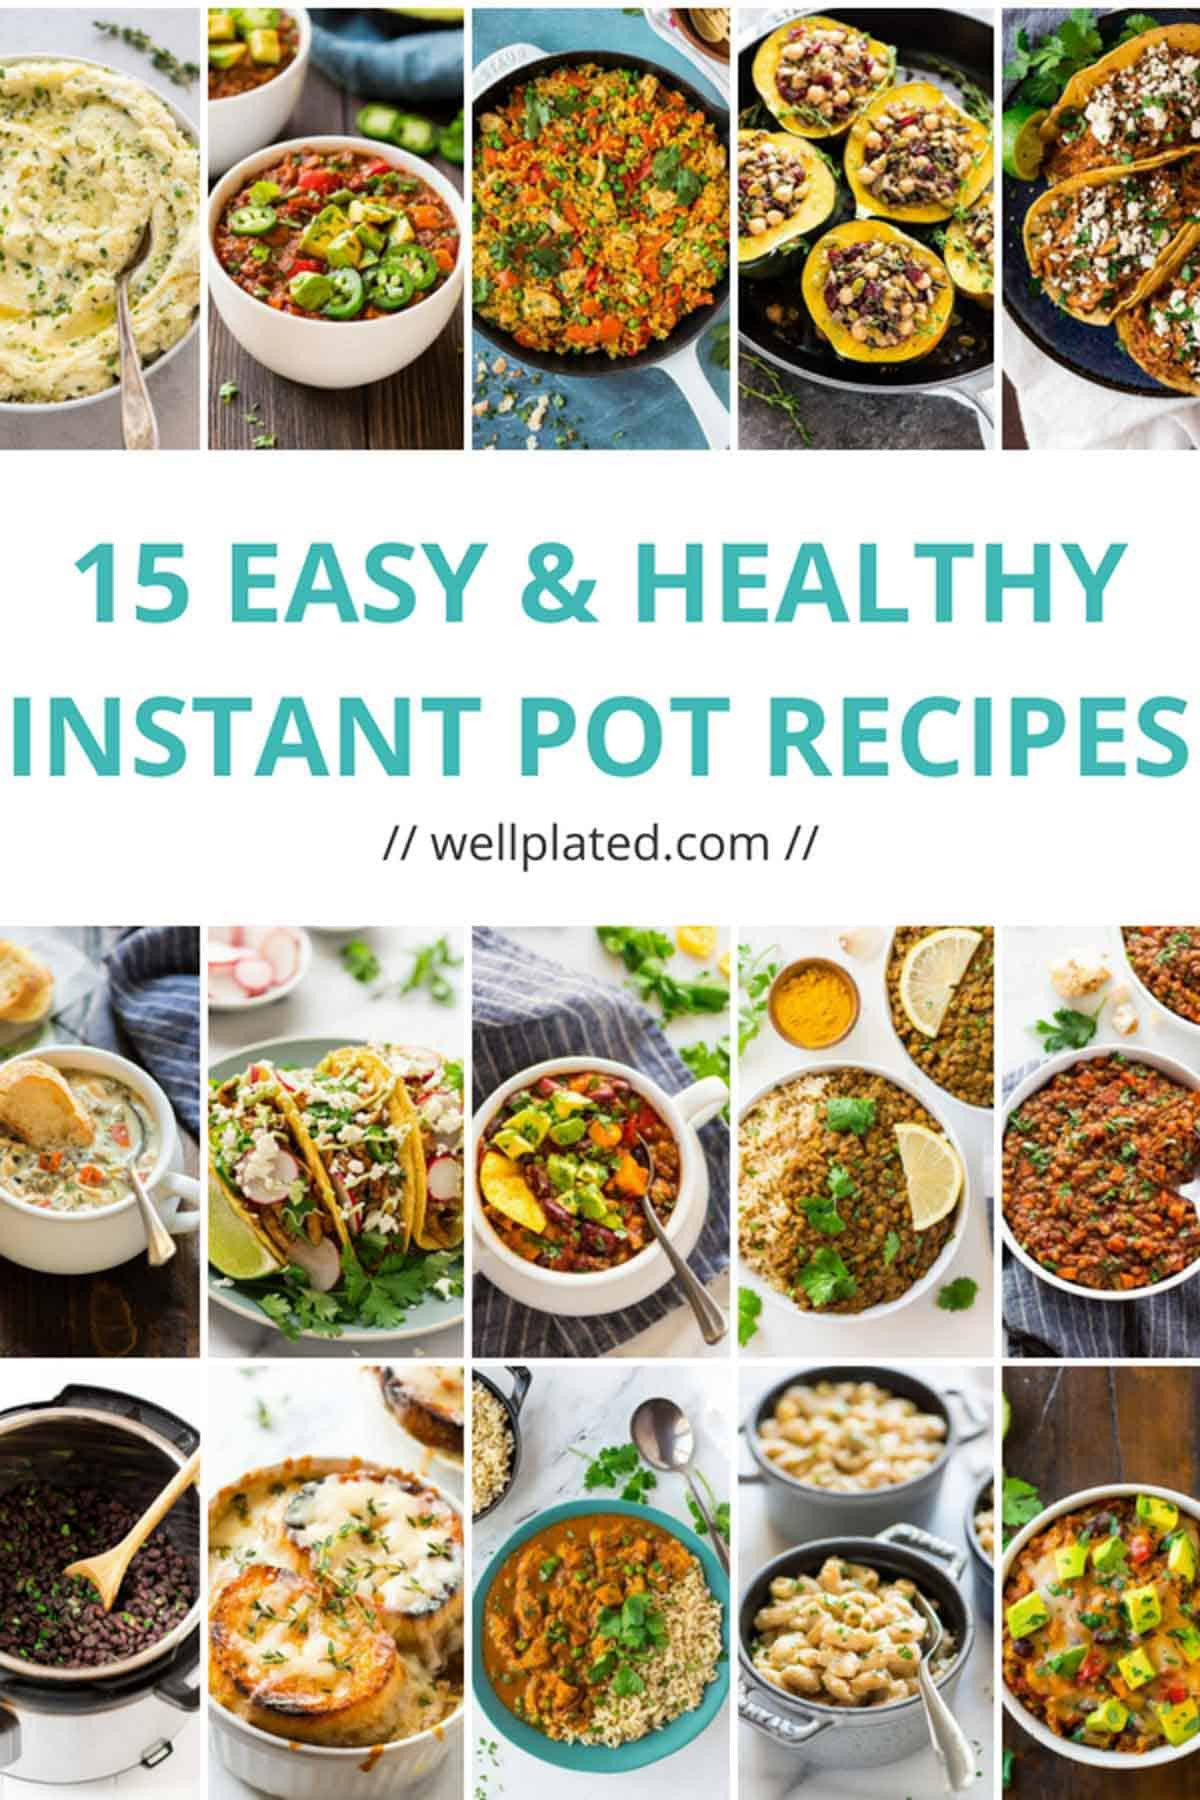 Healthy Instant Pot Dinner Recipes
 15 Healthy Instant Pot Recipes That Anyone Can Make